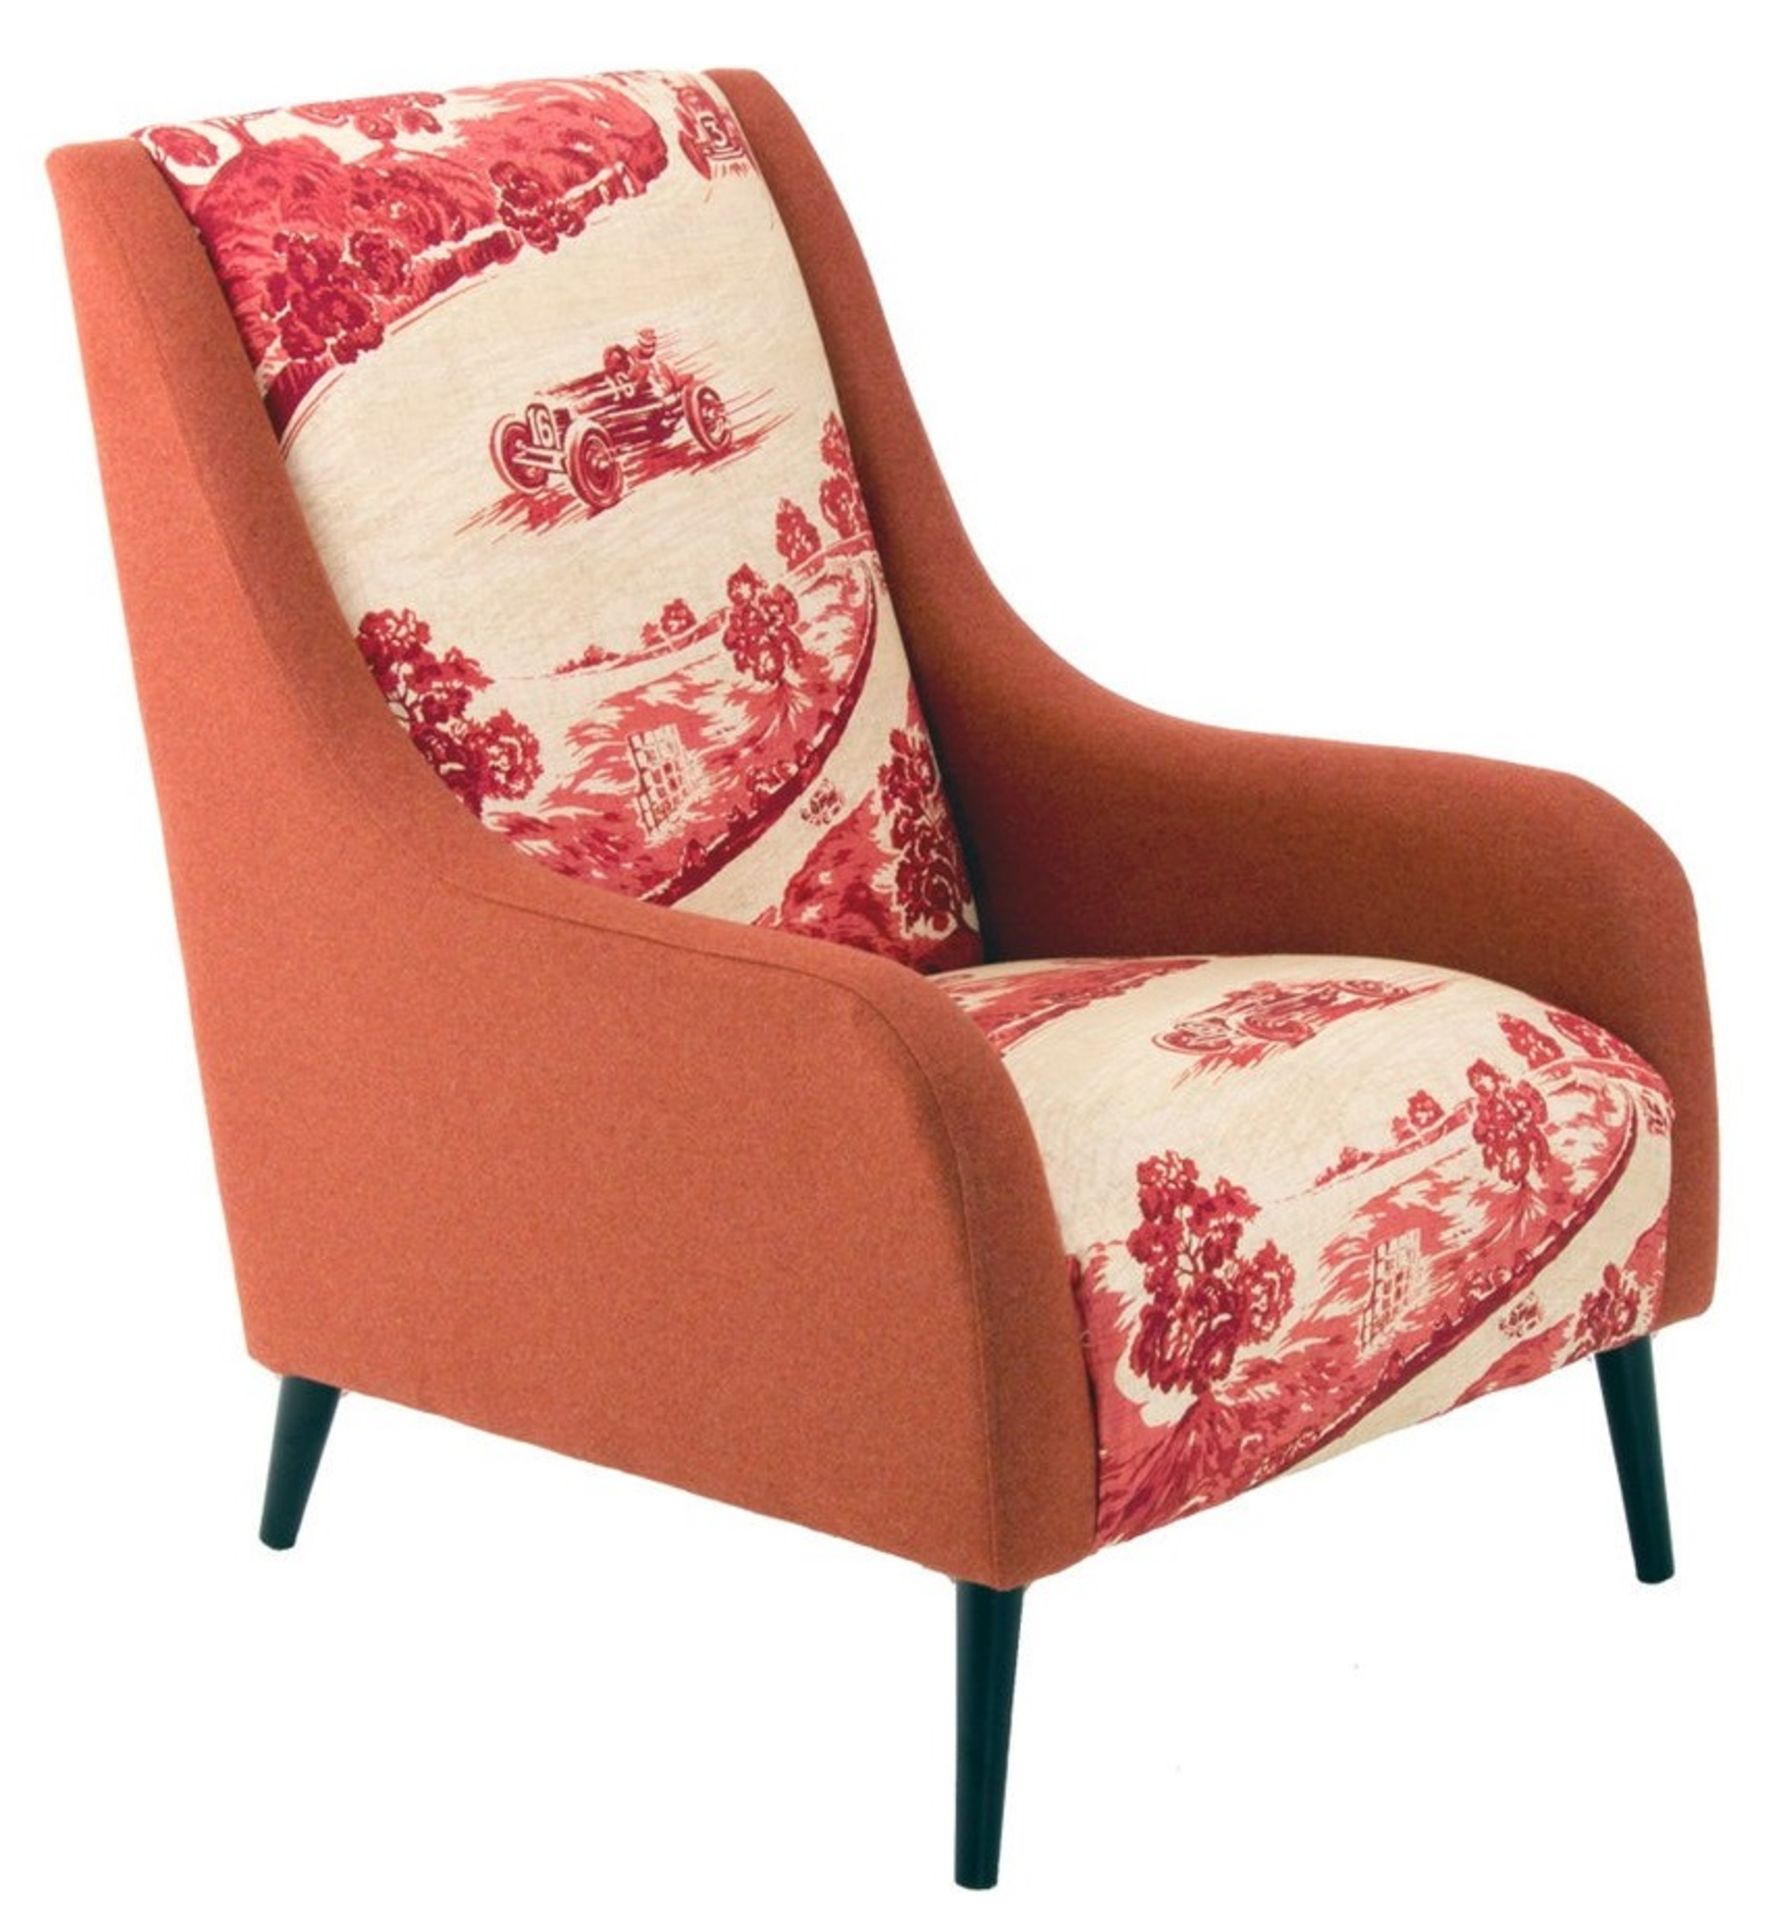 1 x Lauran Armchair Upholstered in Goodwood Race Car Fabric - RRP £779!